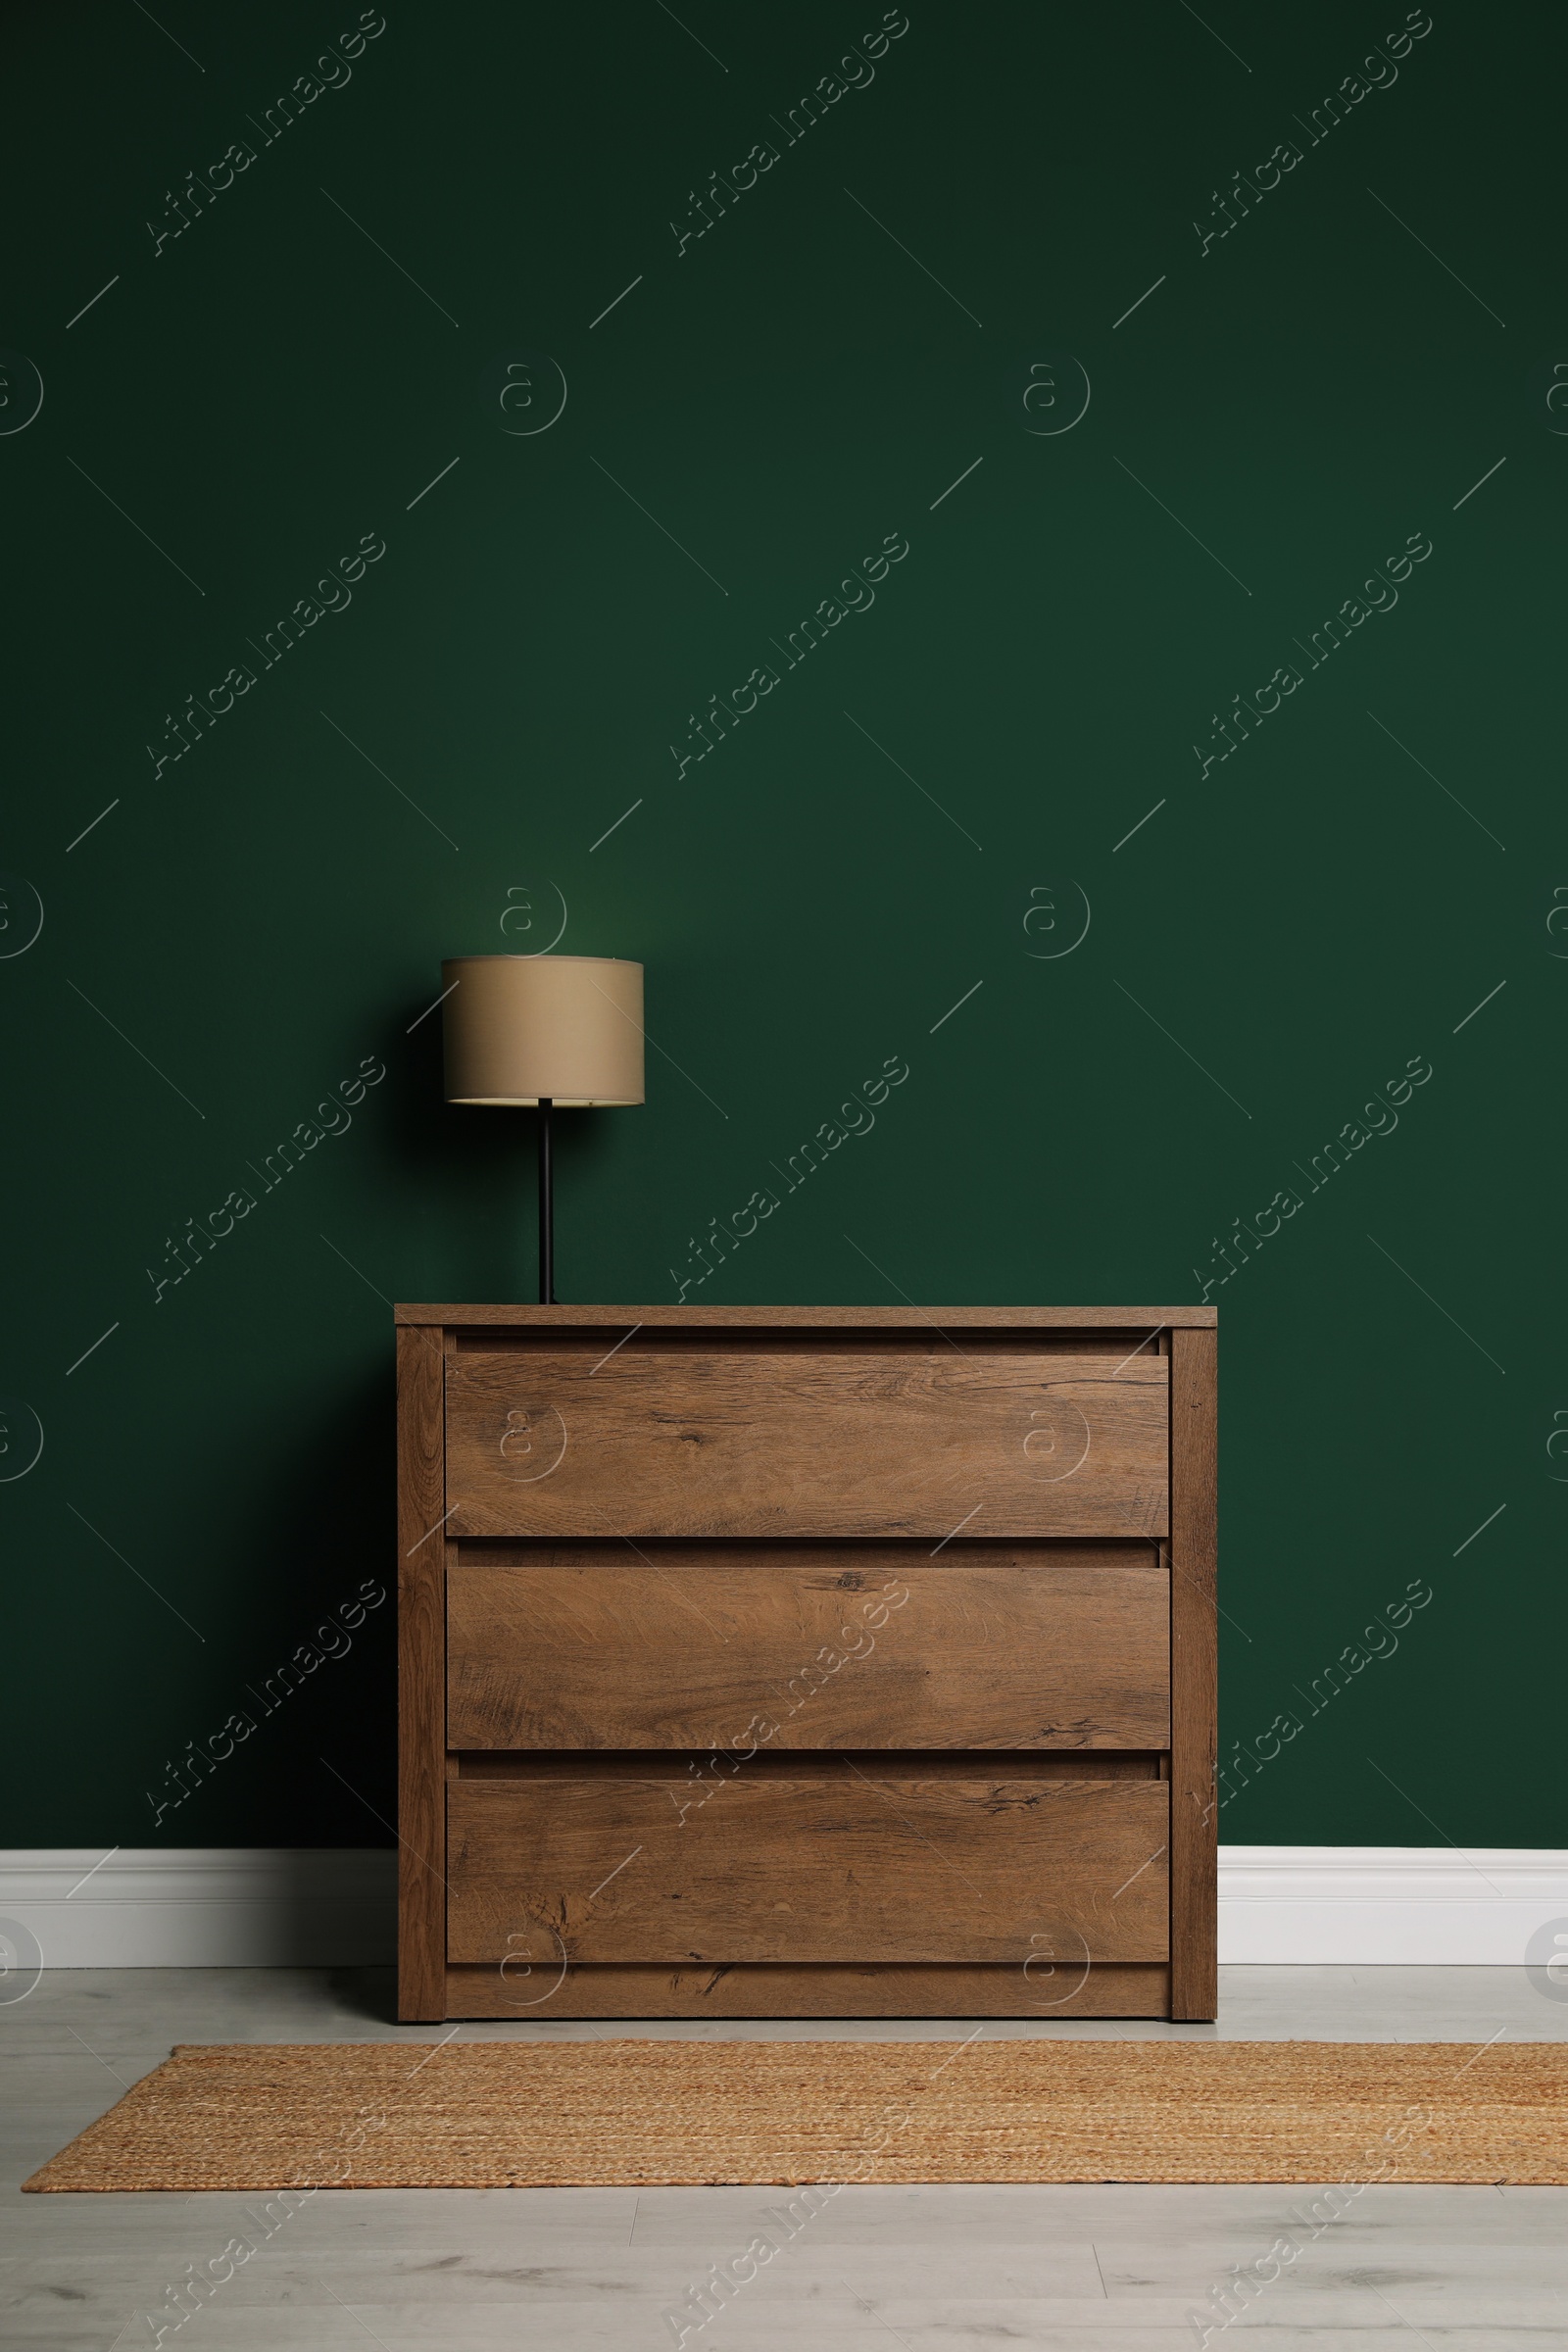 Photo of Modern wooden chest of drawers with lamp near green wall indoors